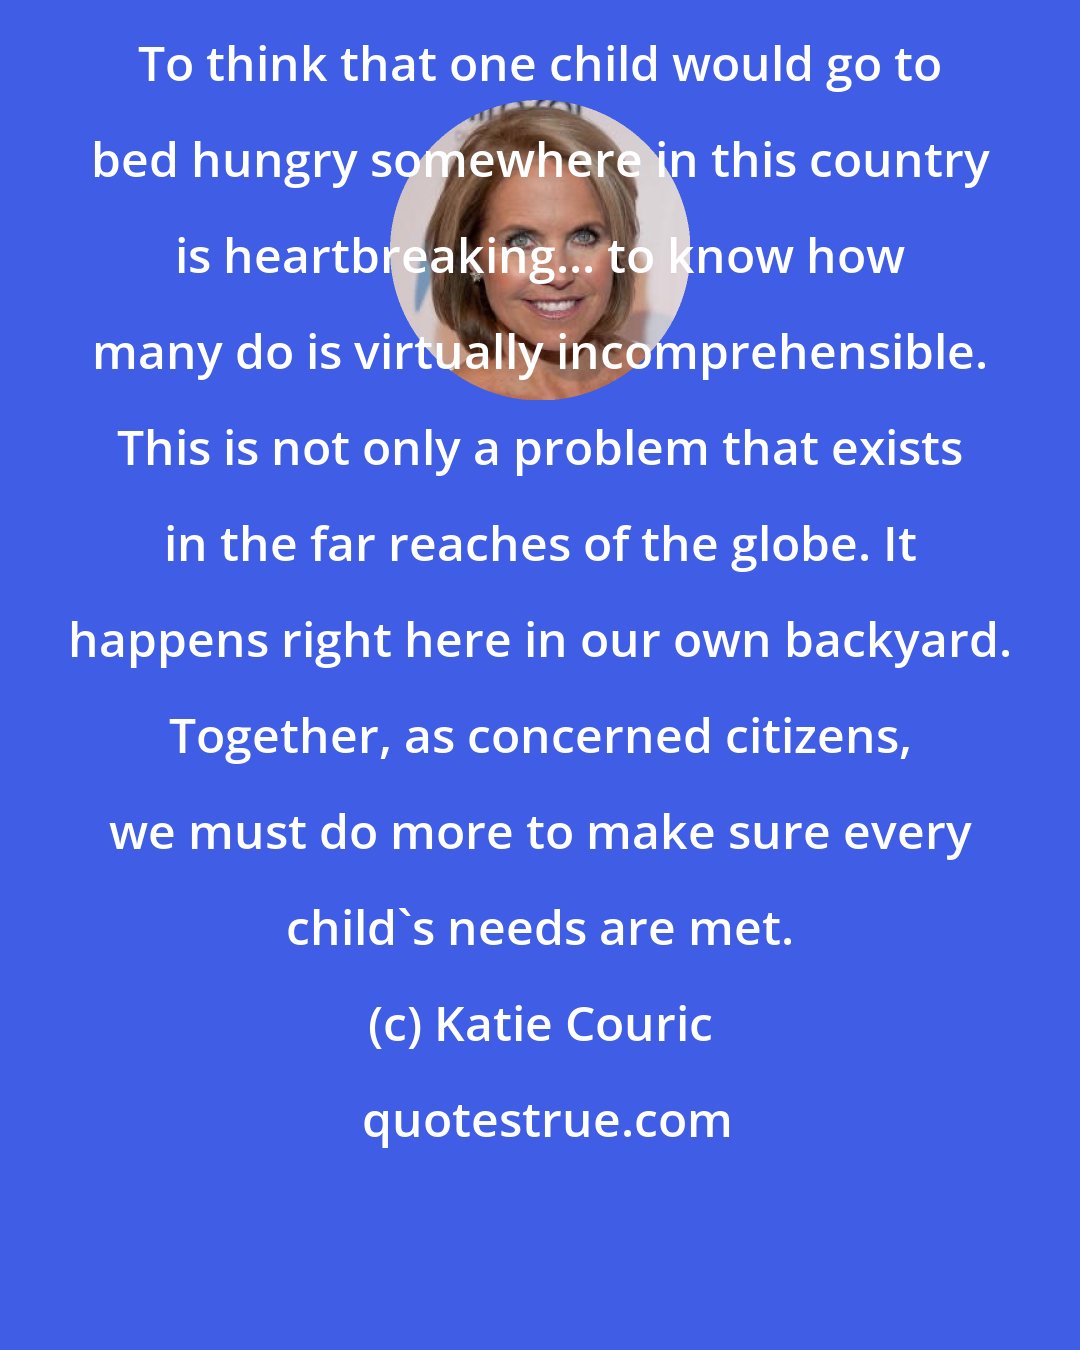 Katie Couric: To think that one child would go to bed hungry somewhere in this country is heartbreaking... to know how many do is virtually incomprehensible. This is not only a problem that exists in the far reaches of the globe. It happens right here in our own backyard. Together, as concerned citizens, we must do more to make sure every child's needs are met.